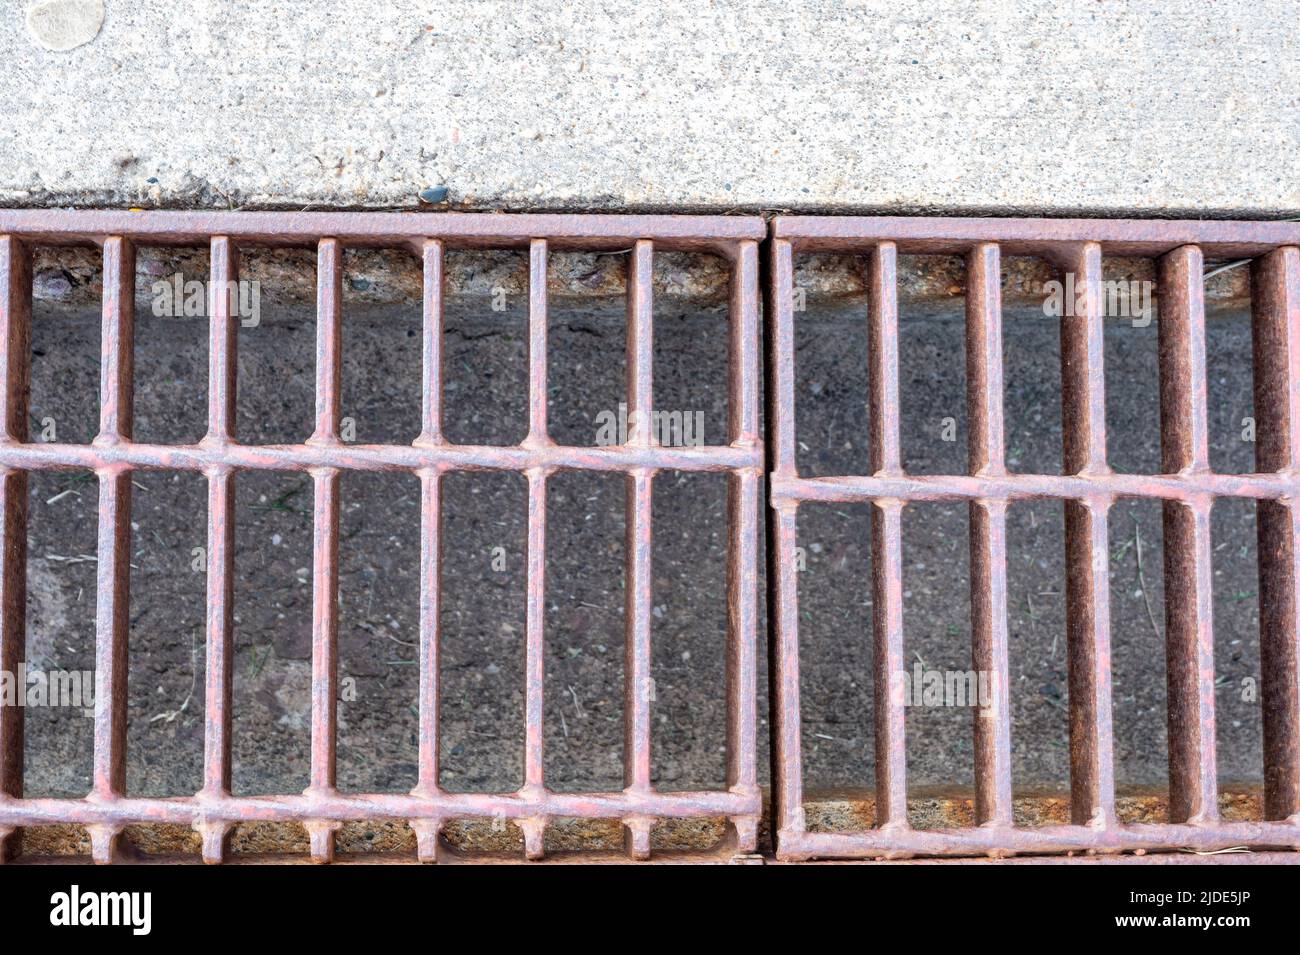 Grate over a stormwater trench in a concrete slab.  Stock Photo